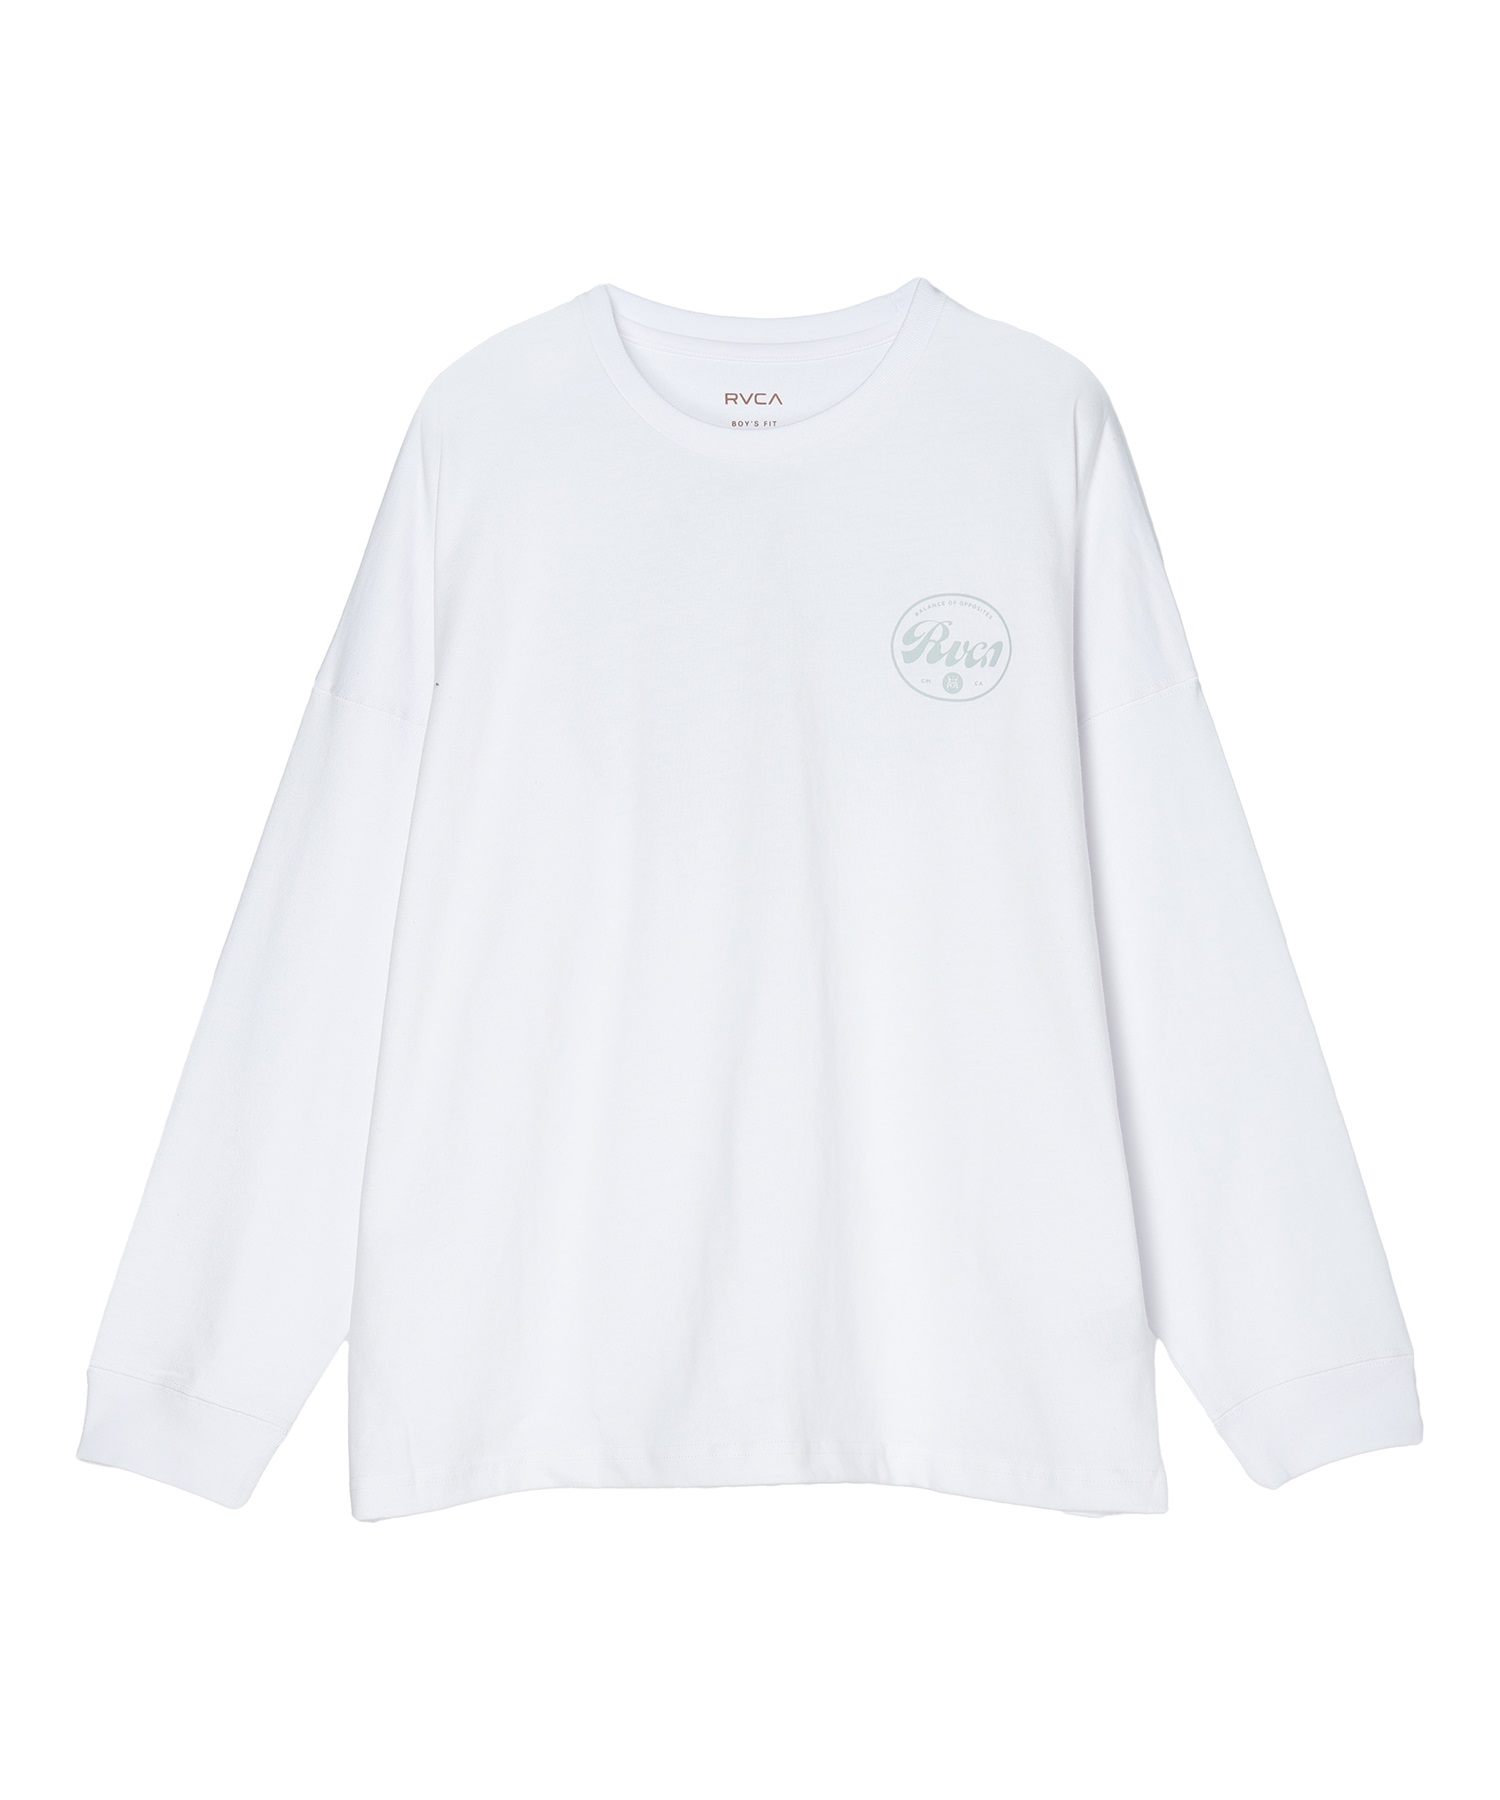 RVCA ルーカ PTEE BD046-226 キッズ 長袖Tシャツ(BRK0-130)